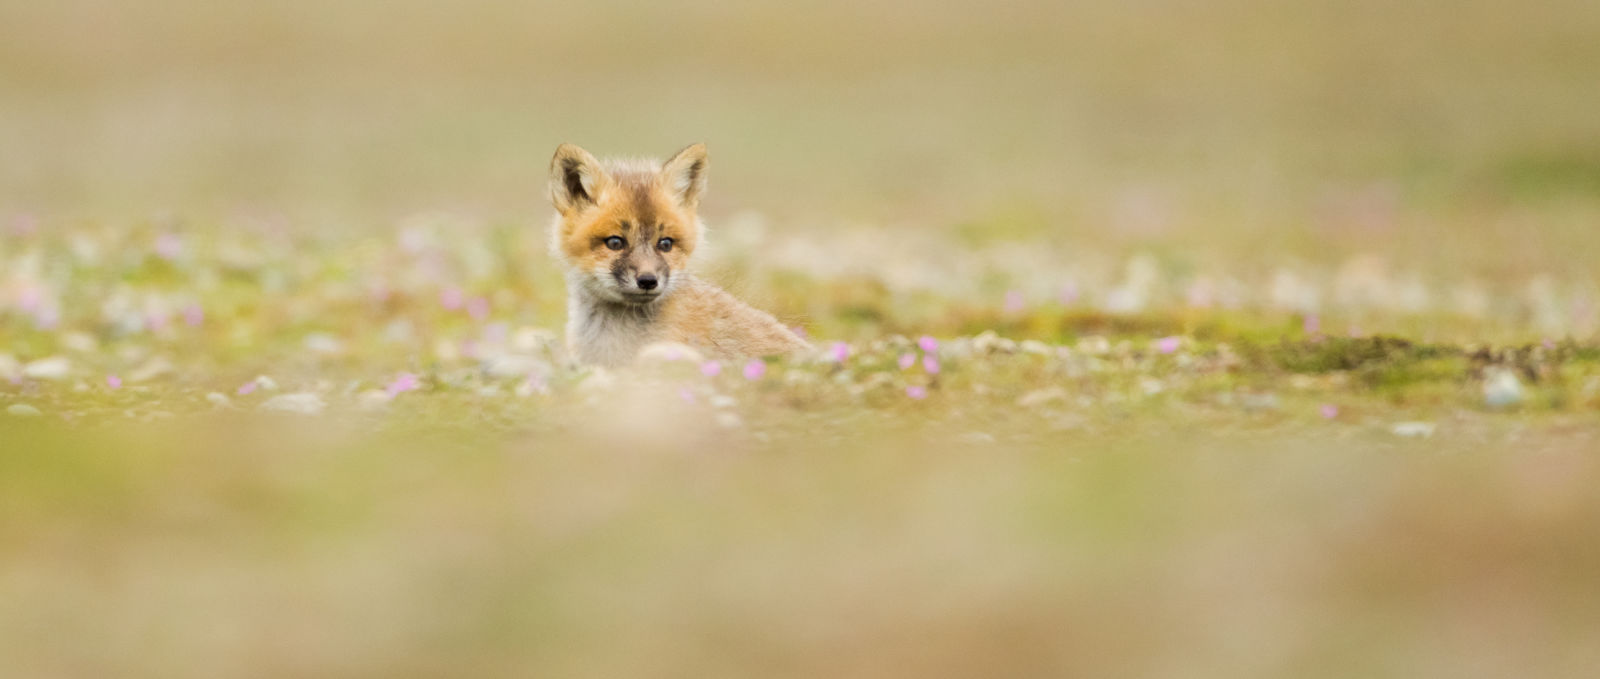 Red fox cub in the field Washington State by Ben Knoot